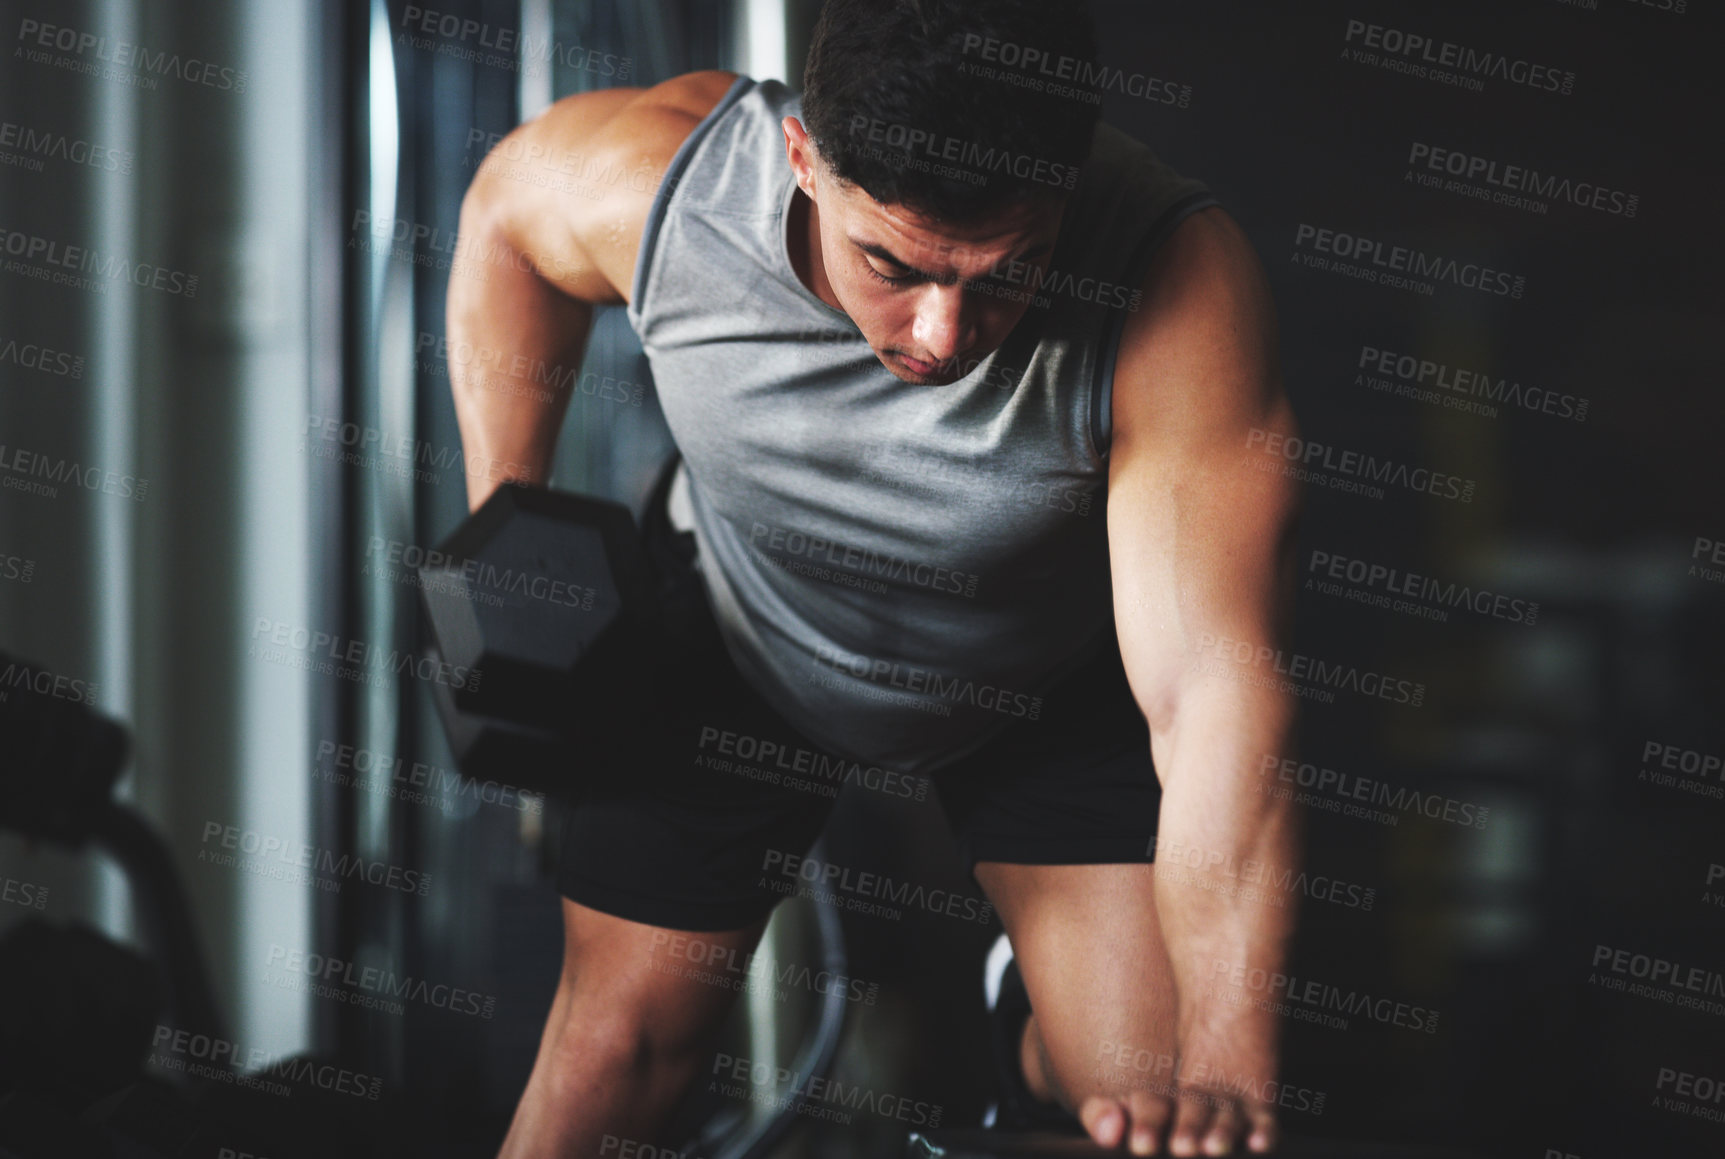 Buy stock photo Shot of a sporty young man exercising with a dumbbell at the gym